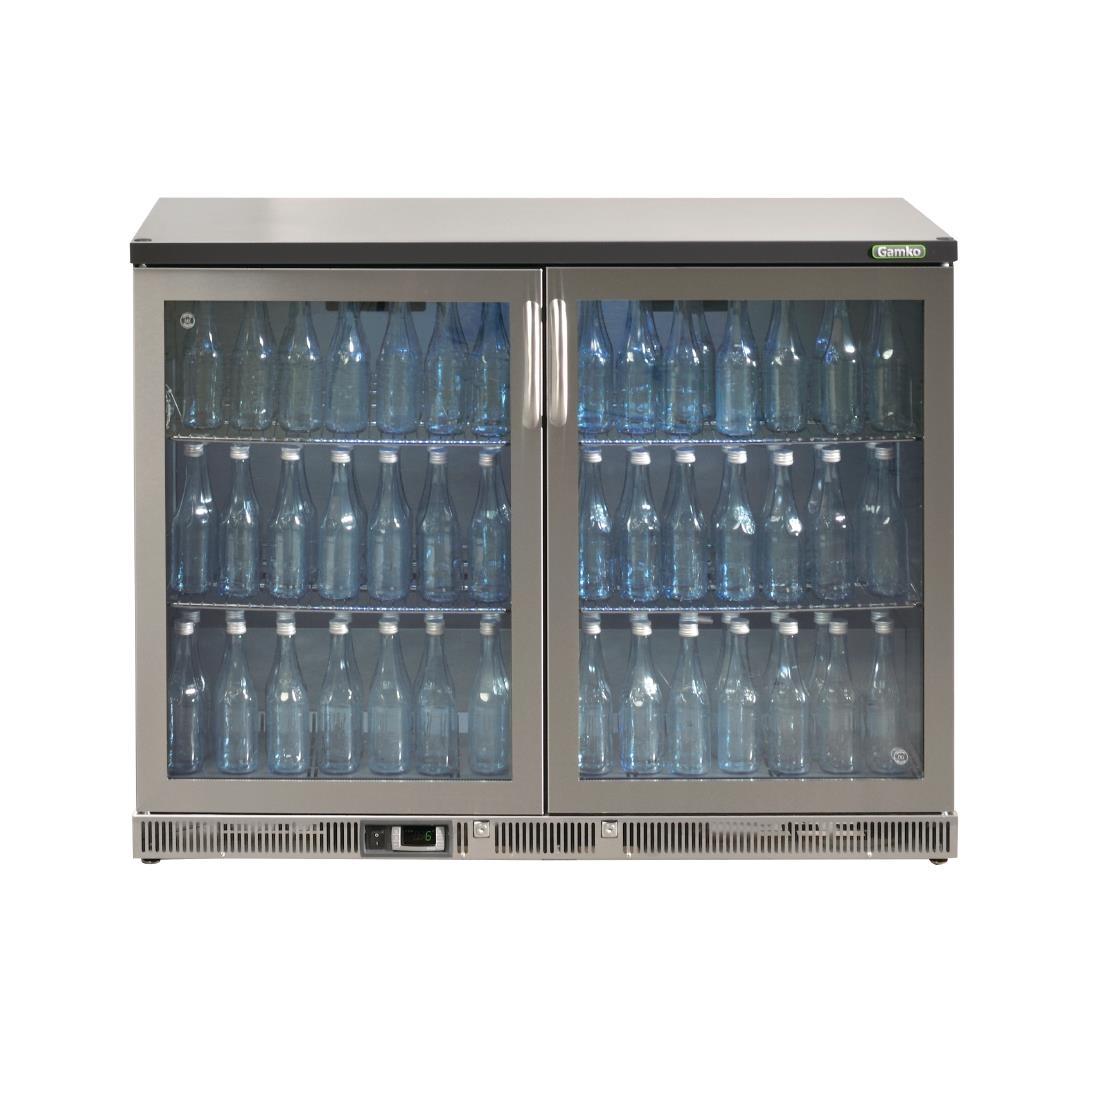 Gamko Bottle Cooler - Double Hinged Door 275 Ltr Stainless Steel - CE560  - 2